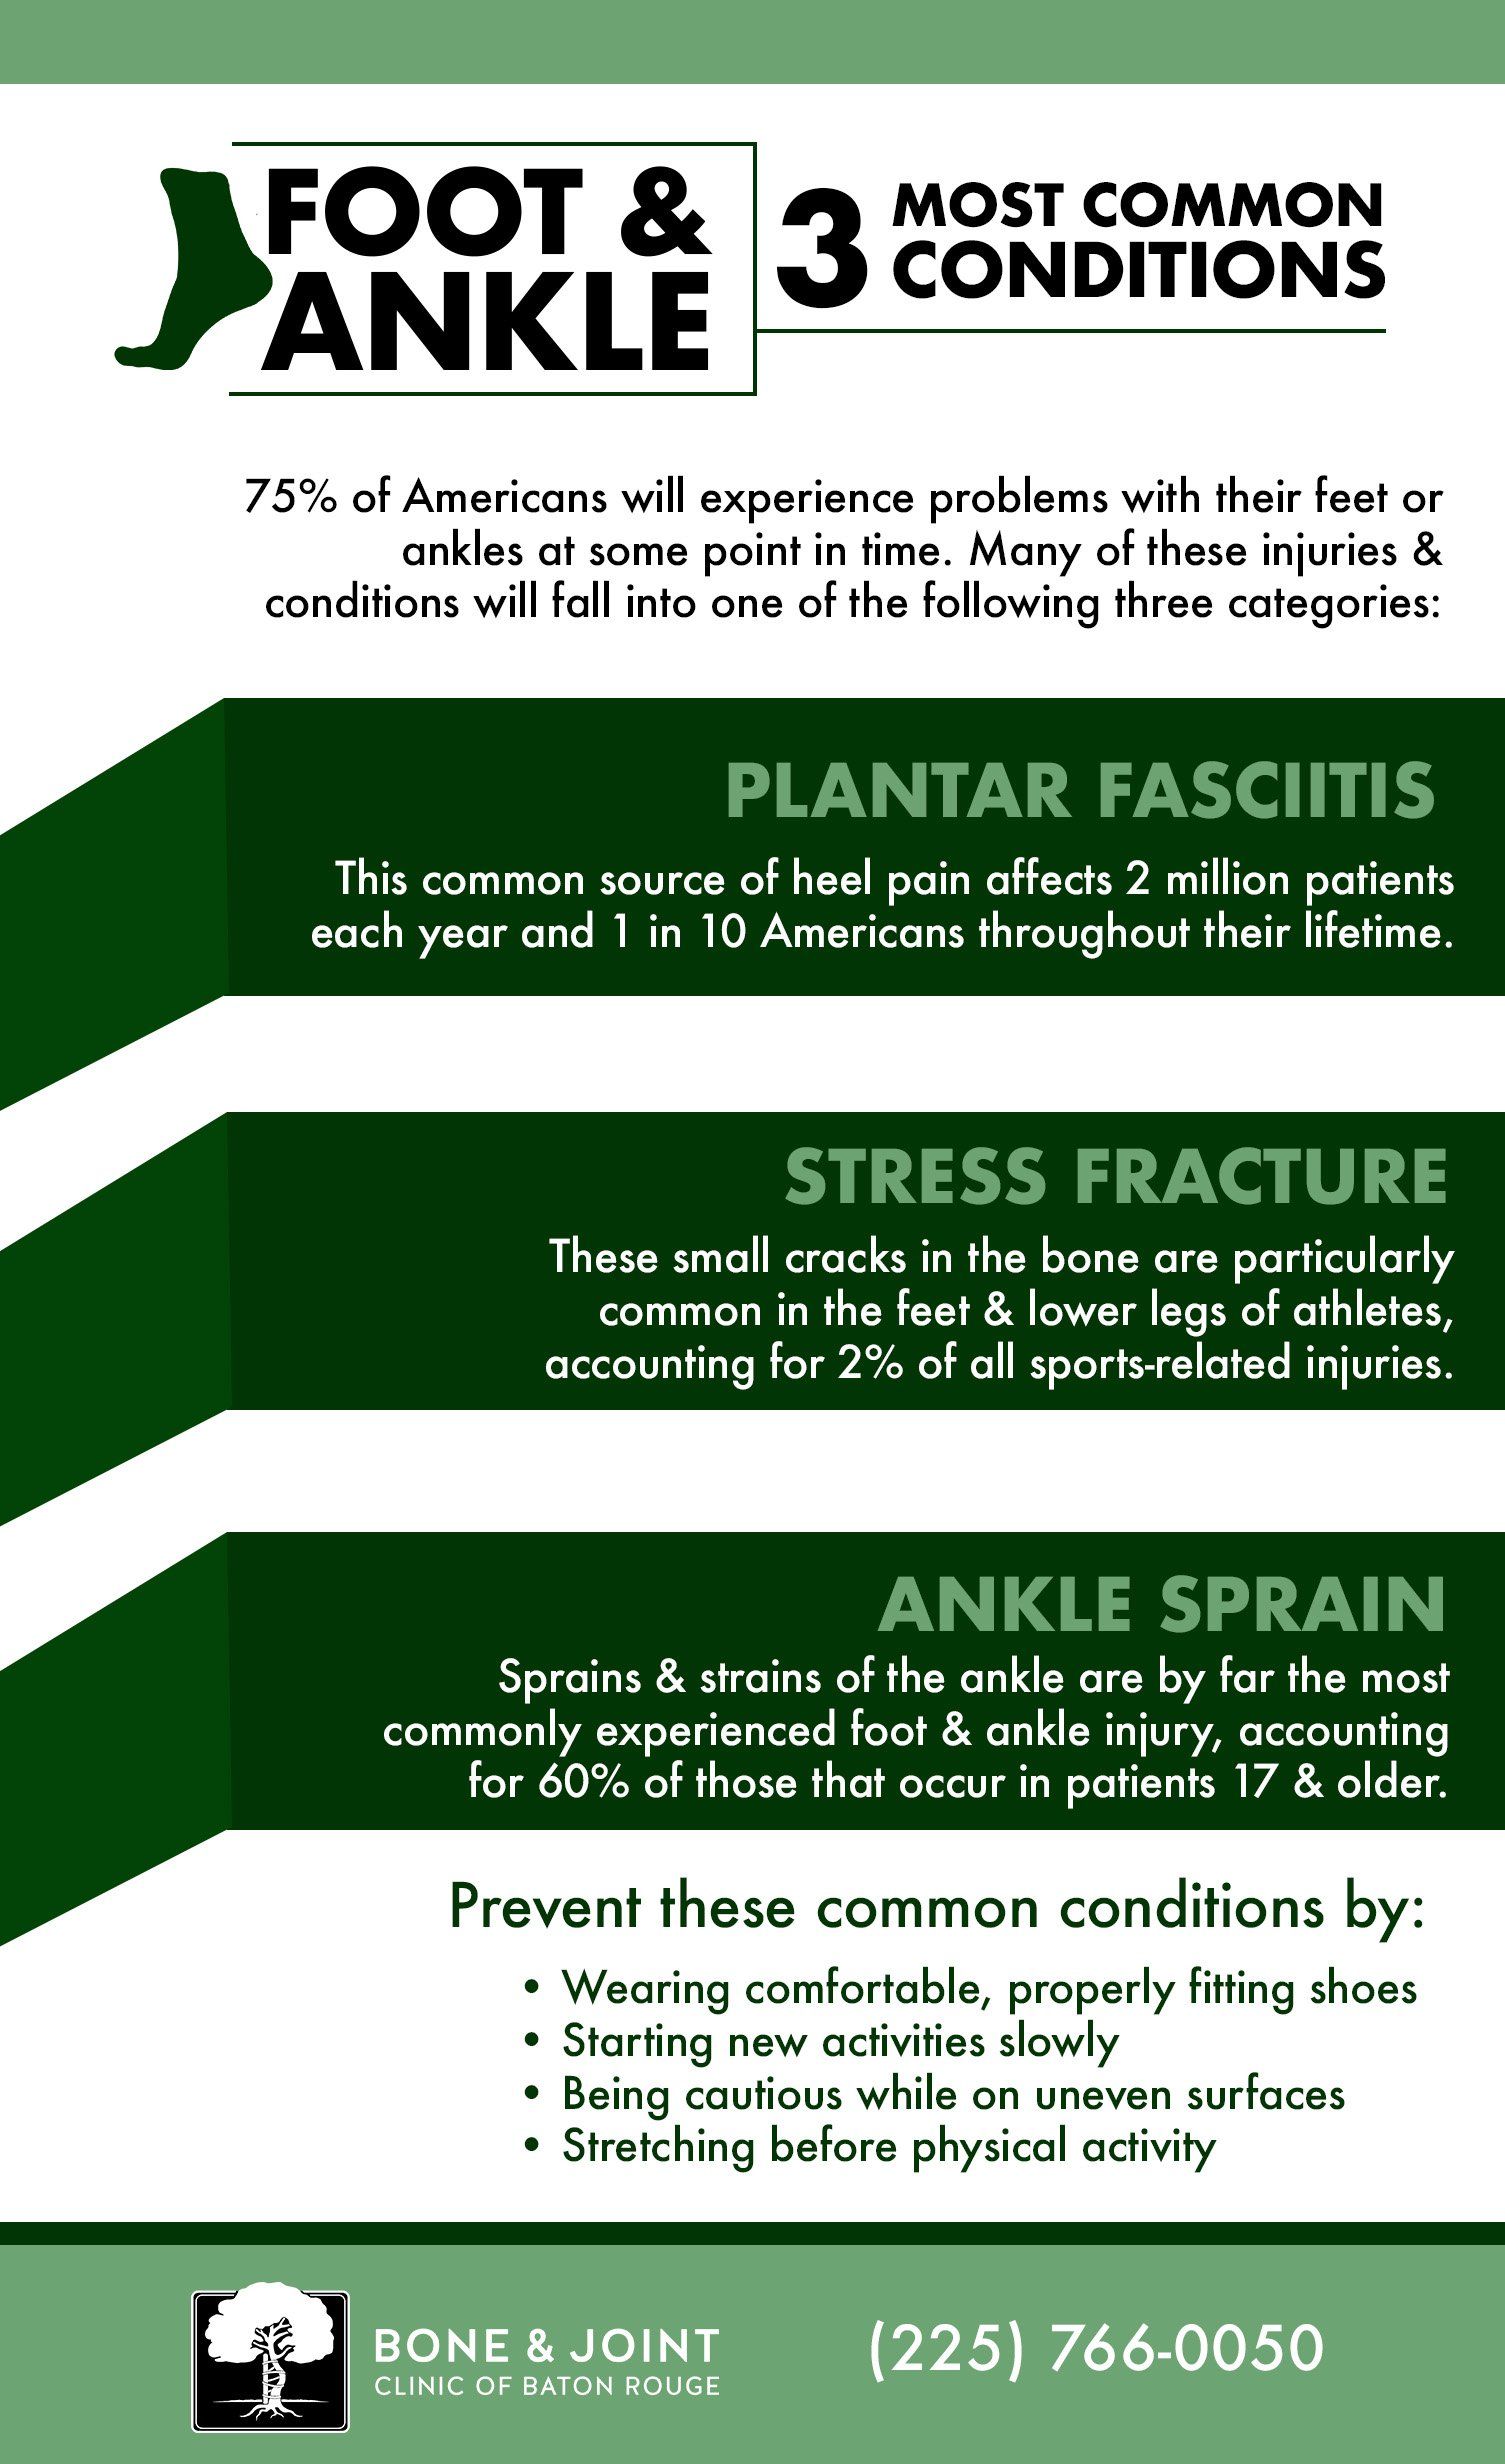 foot and ankle 3 most common conditions